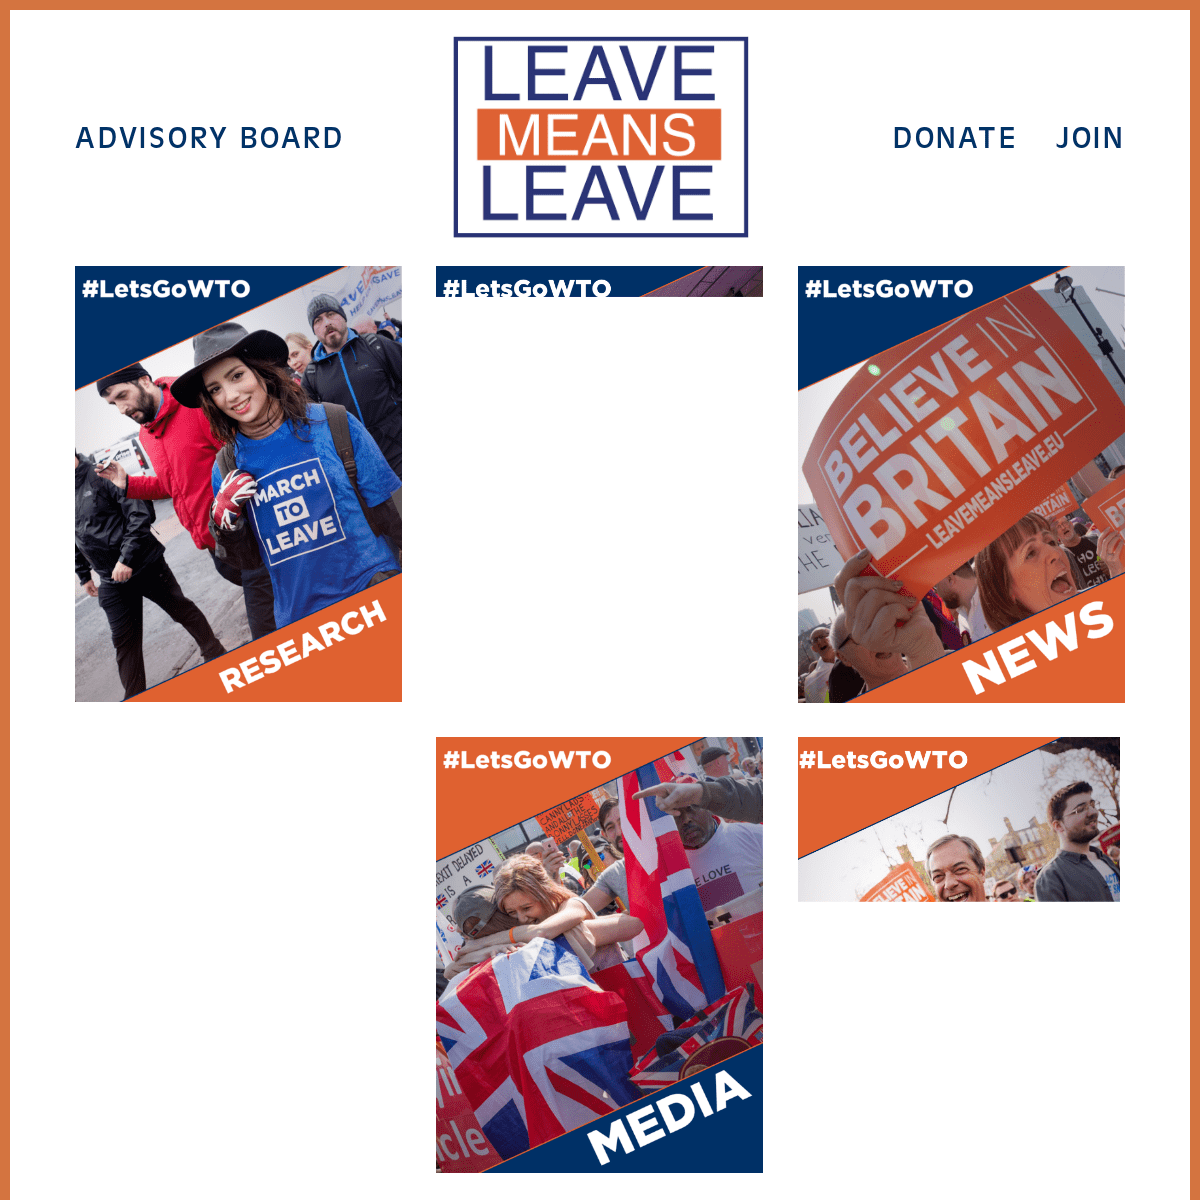 Leave Means Leave